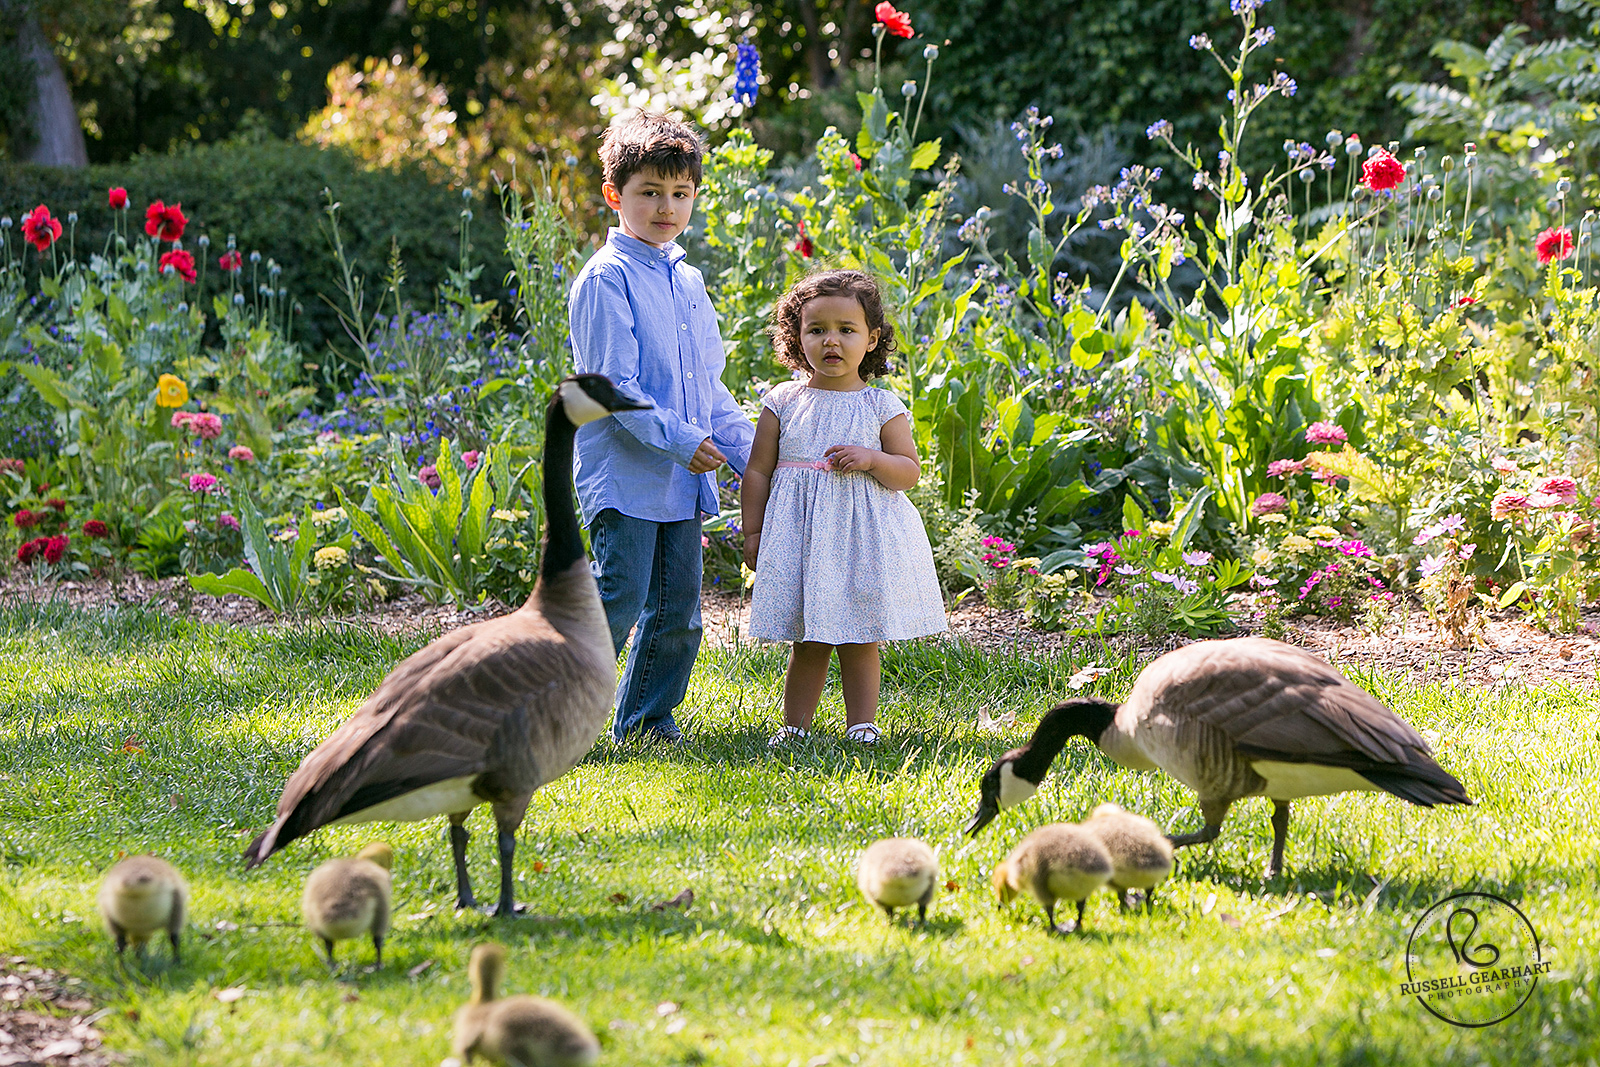 Descanso Gardens Family Portrait – Russell Gearhart Photography – www.gearhartphoto.com